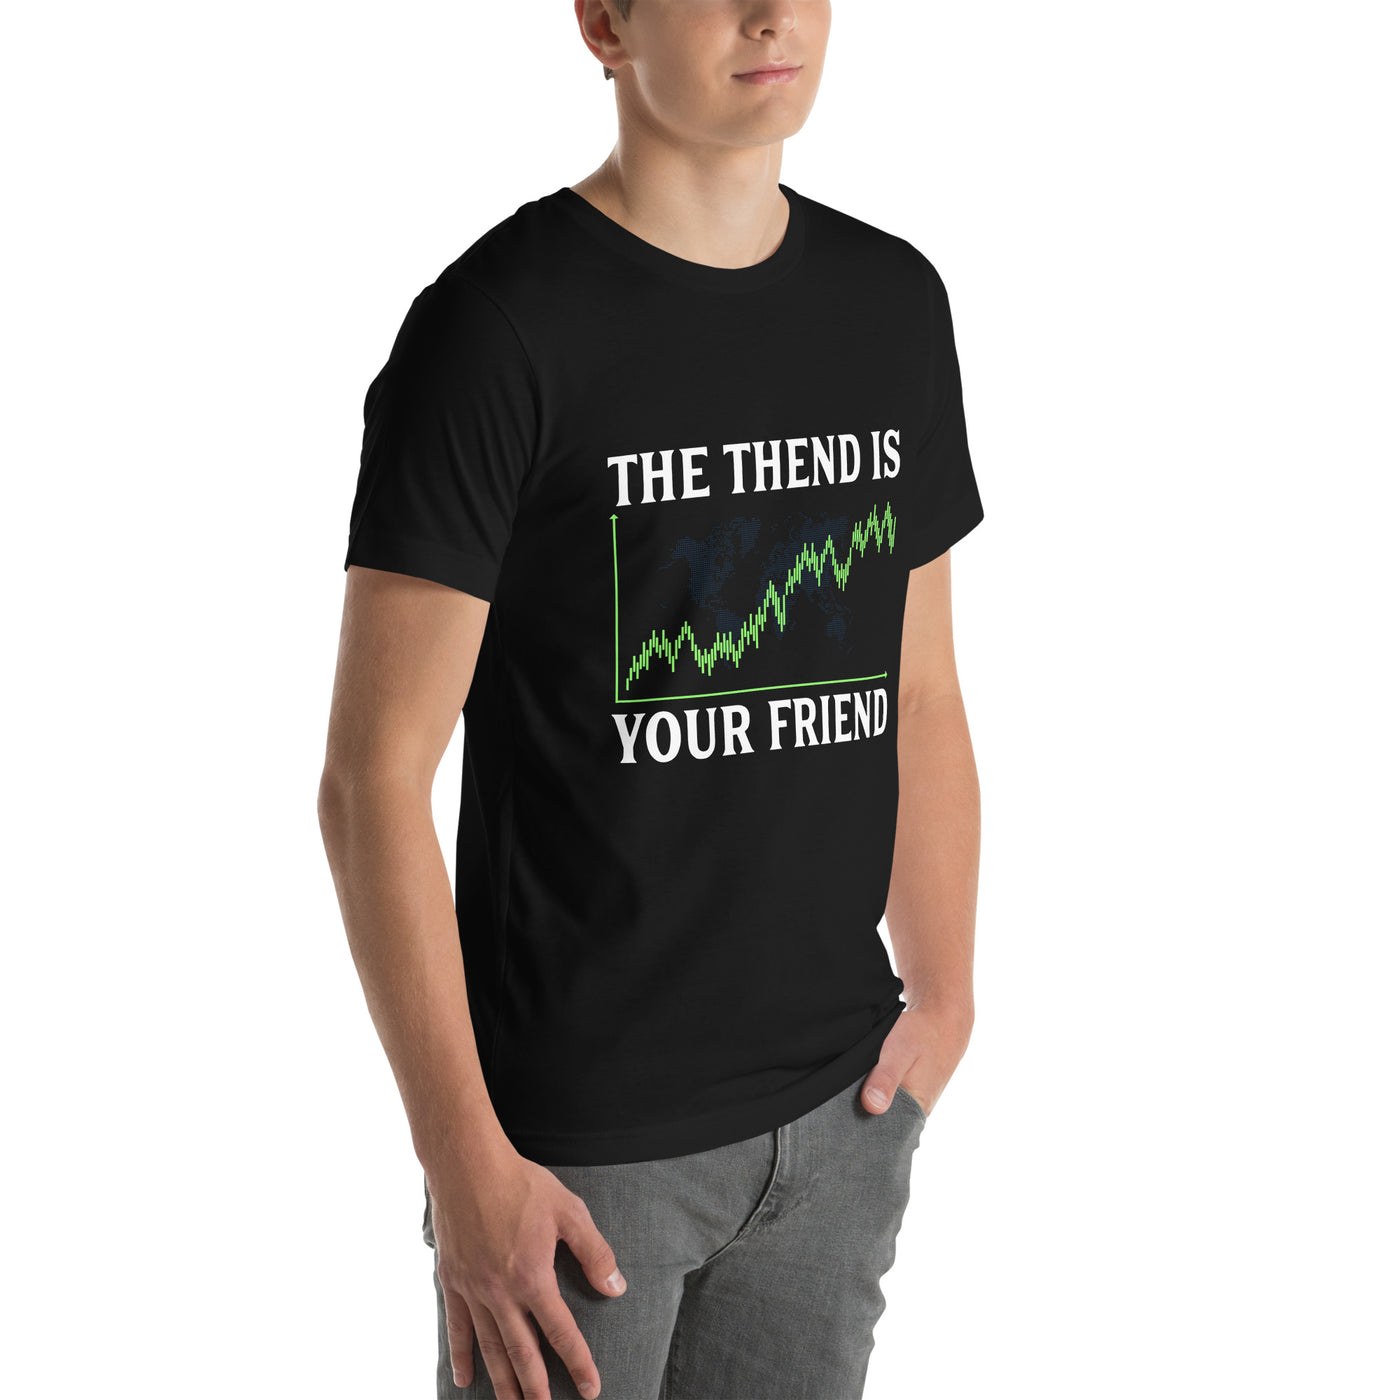 The Trend is your friend - Unisex t-shirt